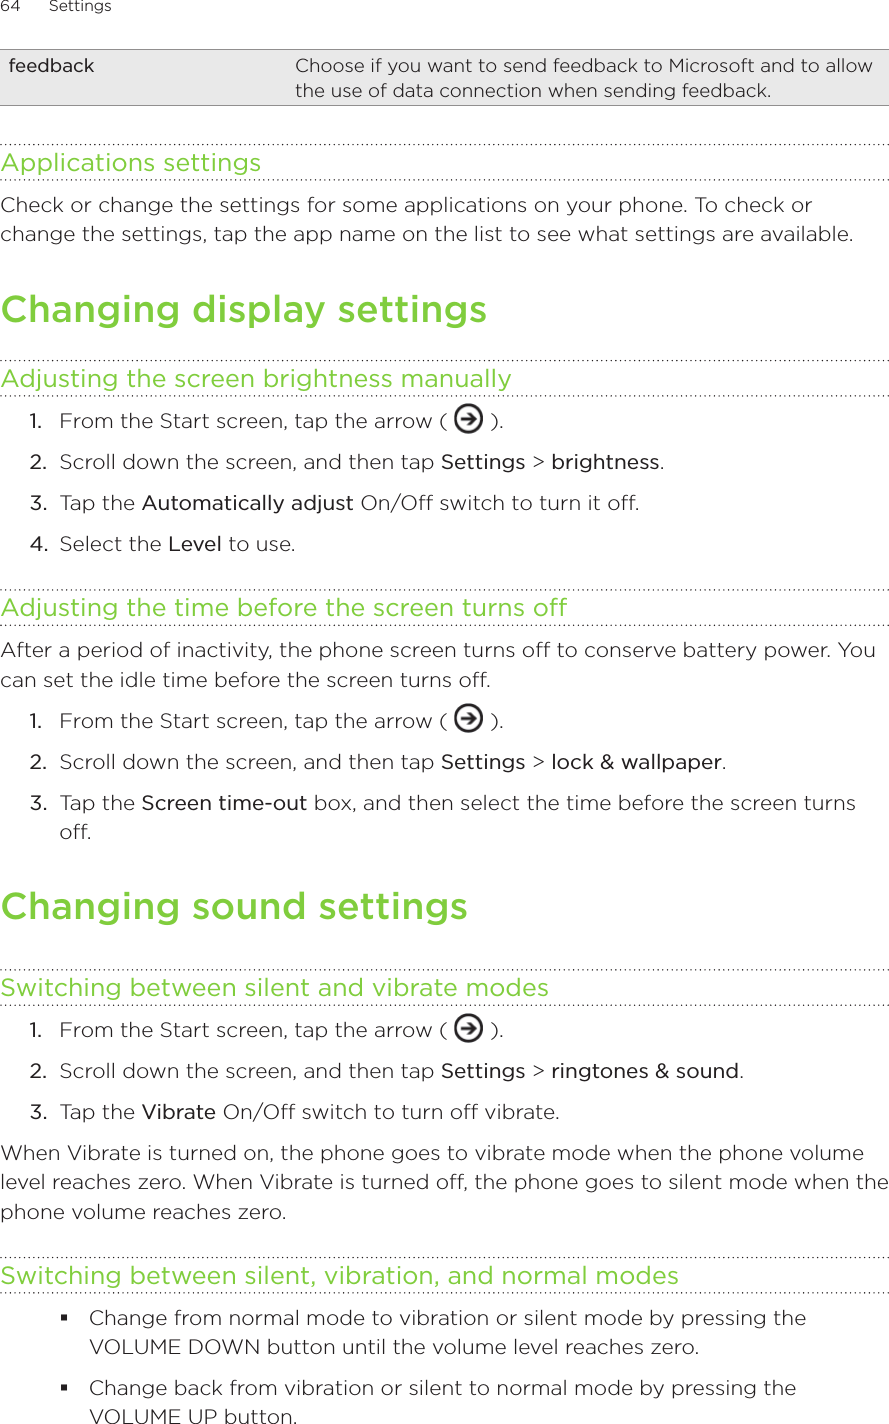 64      Settings      feedback Choose if you want to send feedback to Microsoft and to allow the use of data connection when sending feedback. Applications settingsCheck or change the settings for some applications on your phone. To check or change the settings, tap the app name on the list to see what settings are available. Changing display settingsAdjusting the screen brightness manuallyFrom the Start screen, tap the arrow (   ).Scroll down the screen, and then tap Settings &gt; brightness. Tap the Automatically adjust On/Off switch to turn it off. Select the Level to use.Adjusting the time before the screen turns offAfter a period of inactivity, the phone screen turns off to conserve battery power. You can set the idle time before the screen turns off.From the Start screen, tap the arrow (   ).Scroll down the screen, and then tap Settings &gt; lock &amp; wallpaper. Tap the Screen time-out box, and then select the time before the screen turns off.Changing sound settingsSwitching between silent and vibrate modesFrom the Start screen, tap the arrow (   ).Scroll down the screen, and then tap Settings &gt; ringtones &amp; sound. Tap the Vibrate On/Off switch to turn off vibrate.When Vibrate is turned on, the phone goes to vibrate mode when the phone volume level reaches zero. When Vibrate is turned off, the phone goes to silent mode when the phone volume reaches zero. Switching between silent, vibration, and normal modesChange from normal mode to vibration or silent mode by pressing the VOLUME DOWN button until the volume level reaches zero.Change back from vibration or silent to normal mode by pressing the VOLUME UP button.1.2.3.4.1.2.3.1.2.3.